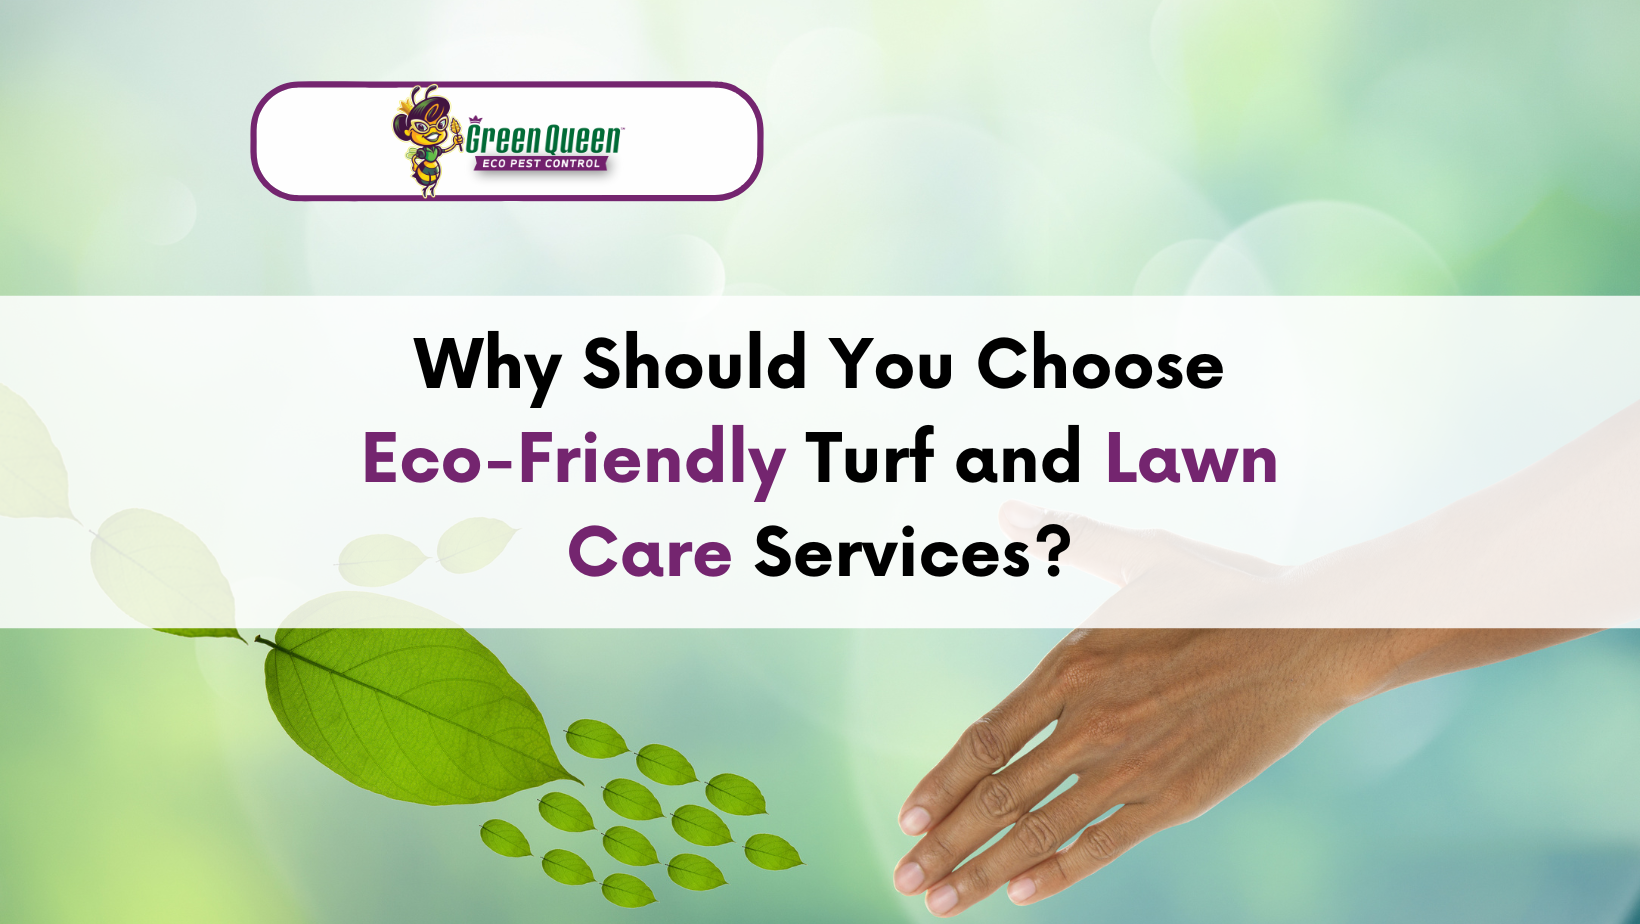 Eco-Friendly Turf and Lawn Care Benefits for Your Home and Environmen